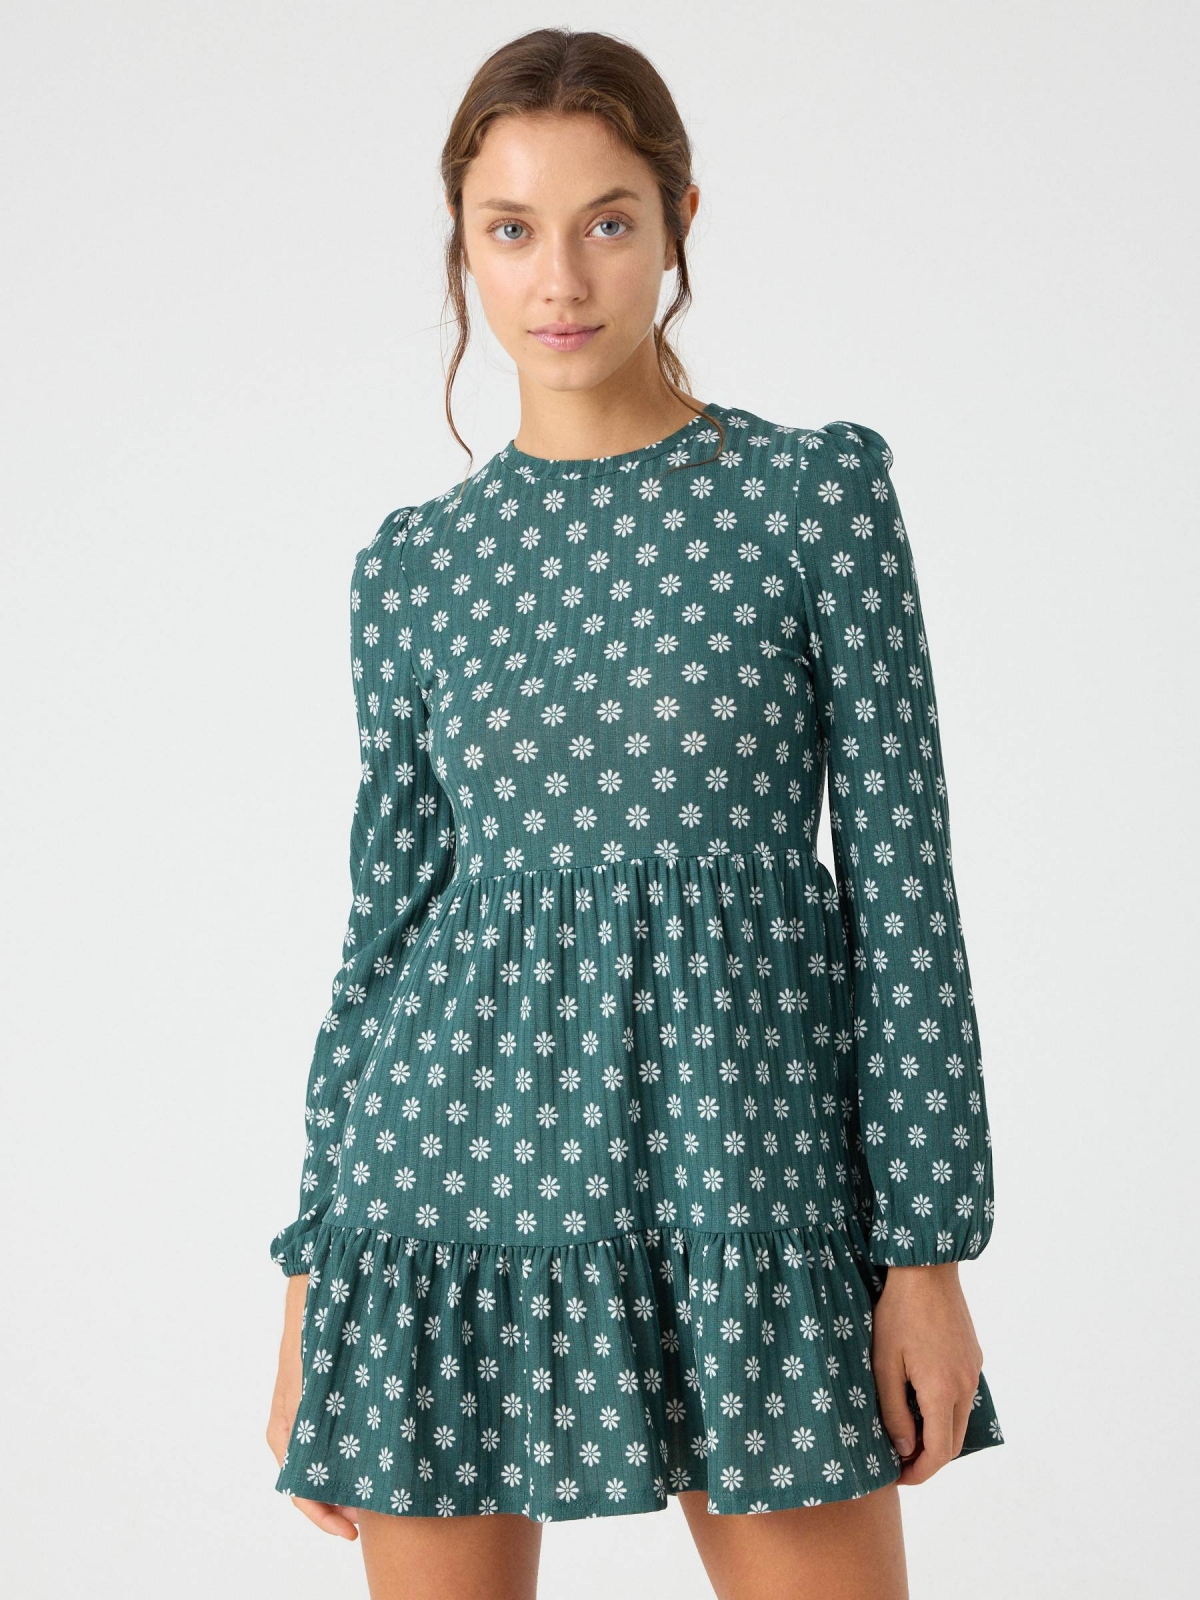 Ribbed daisy print dress dark green middle front view